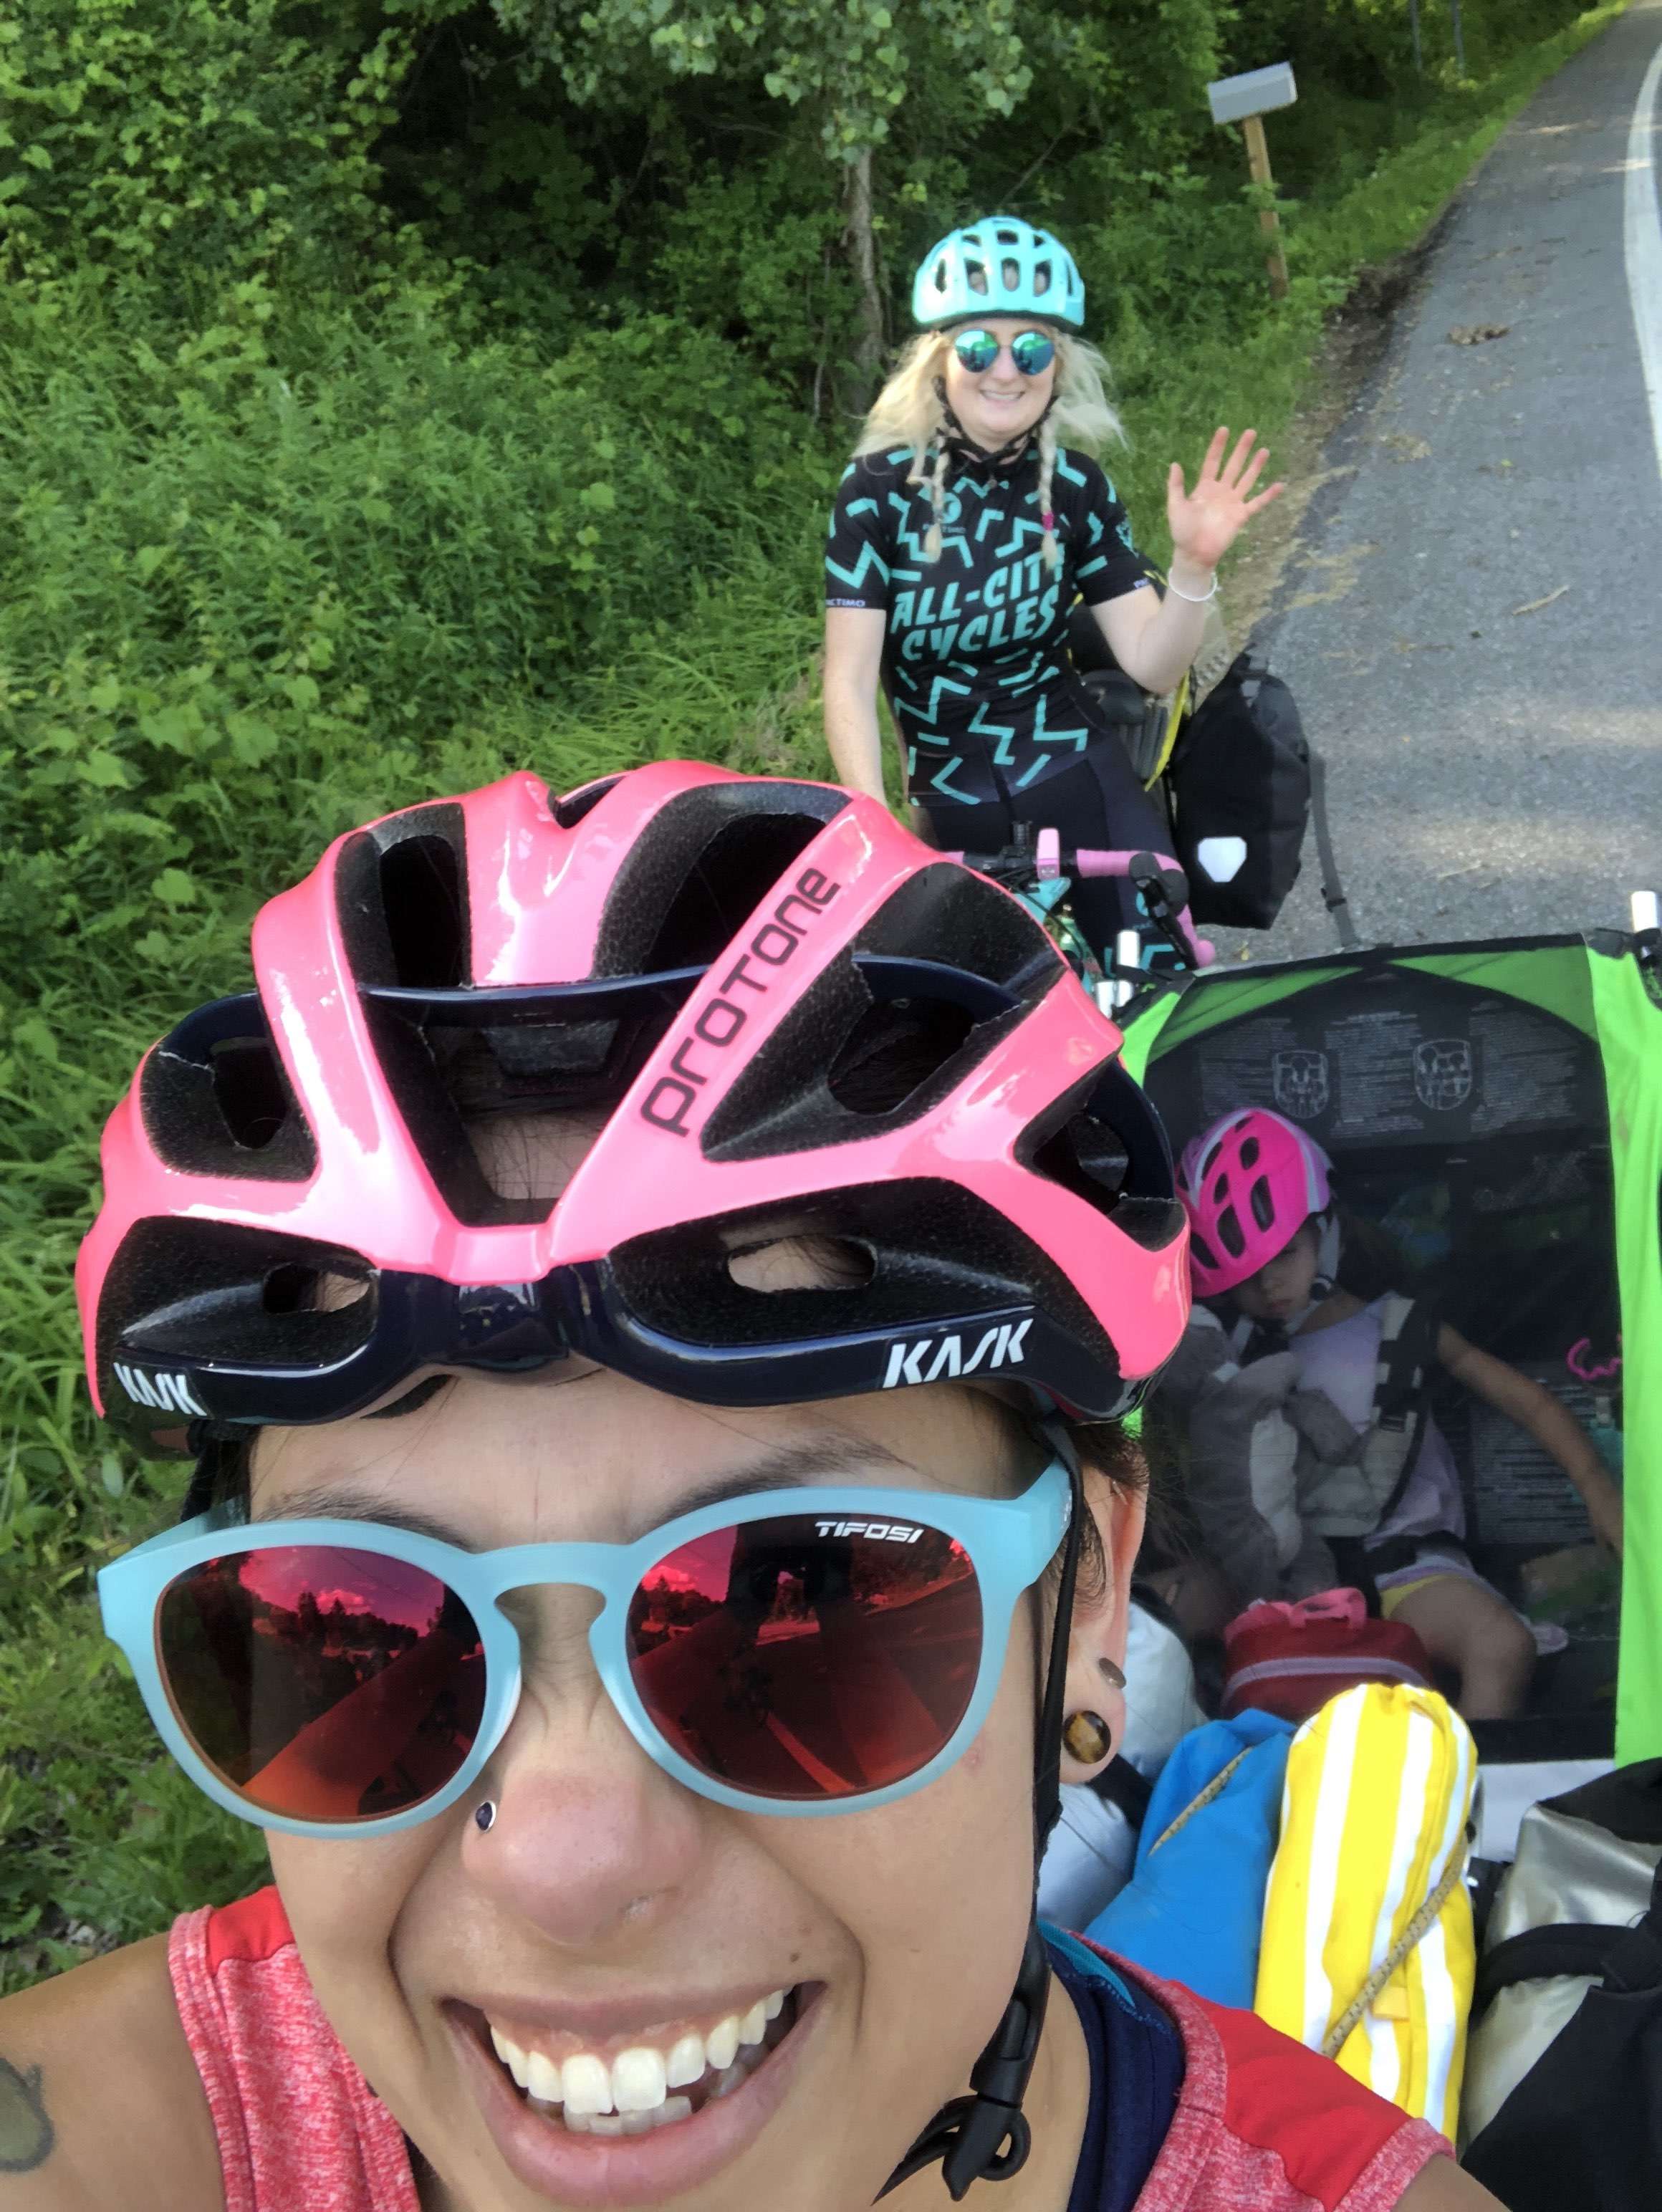 Selfie of female cyclists waving at the camera